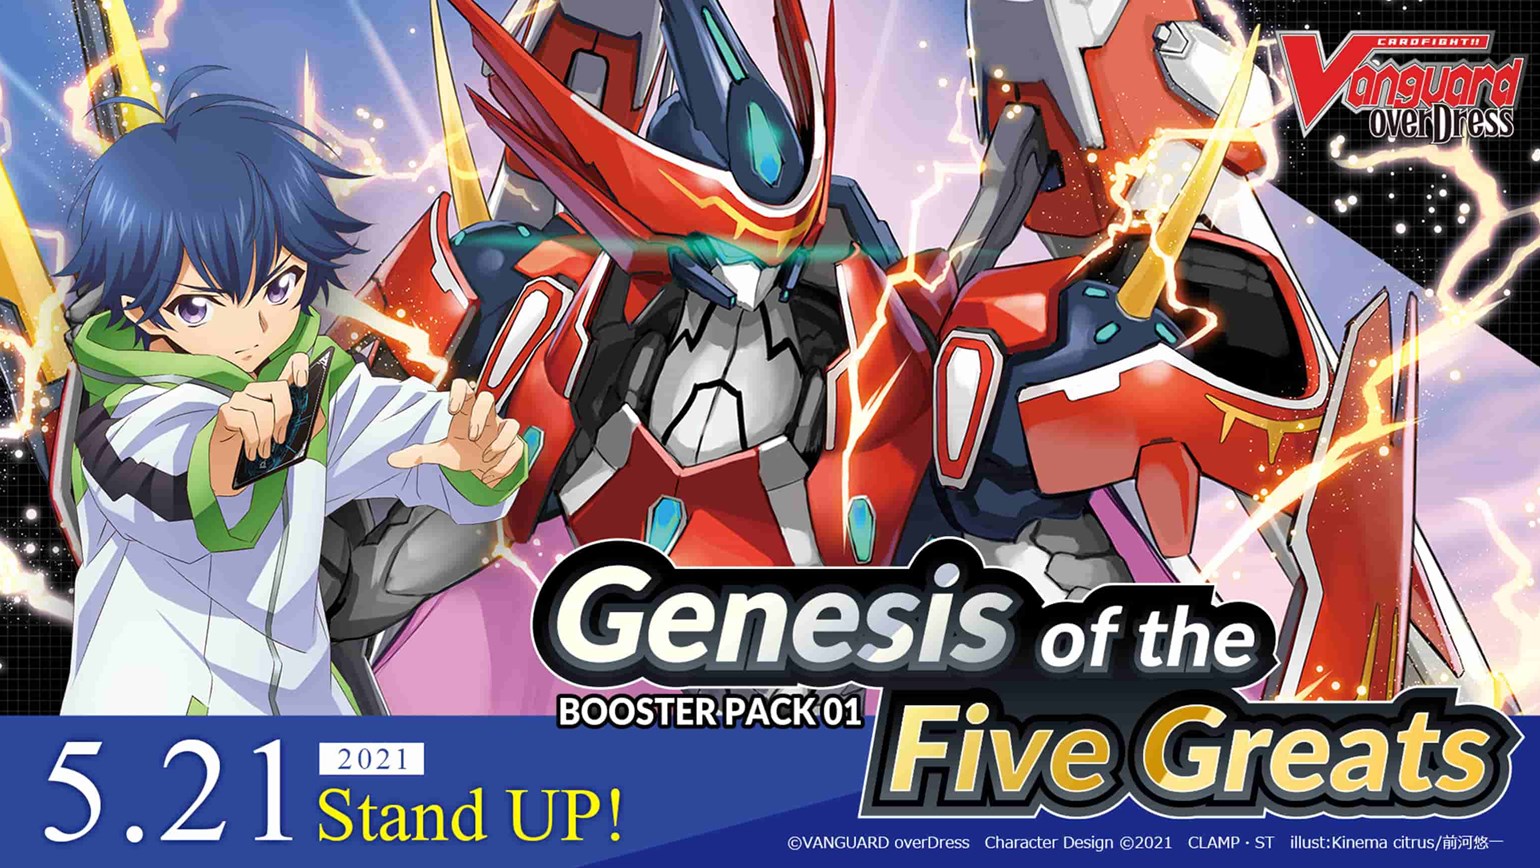 New English Edition overDress Booster Pack 01: Genesis of the Five Greats, Coming to Stores on May 21st!